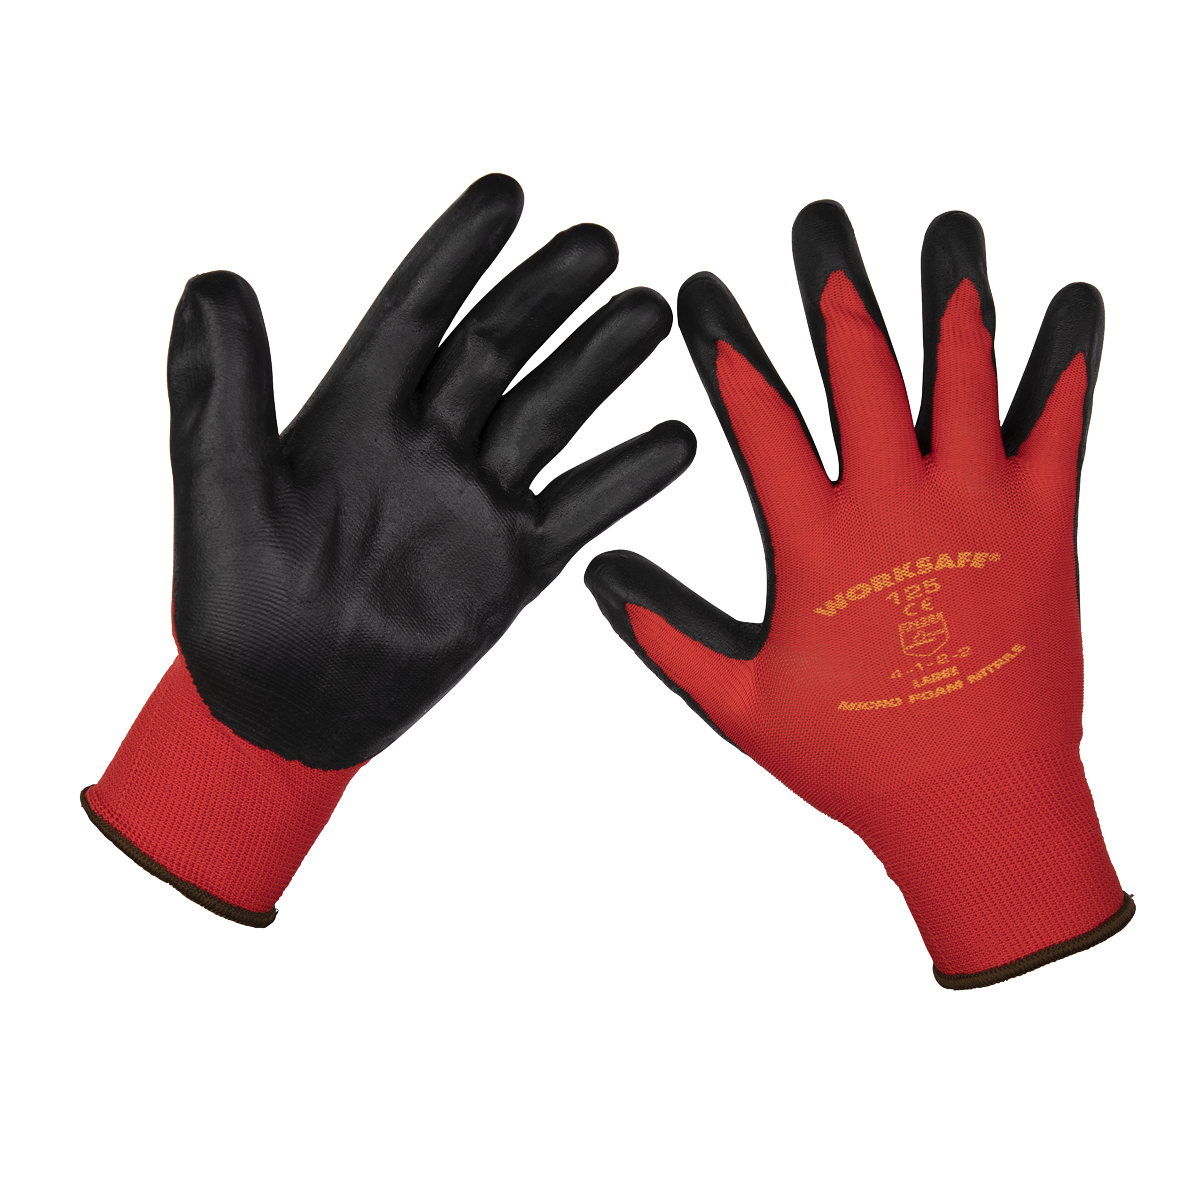 Sealey Nitrile Foam Gloves (Large) - Pack of 12 Pairs 9125L/12